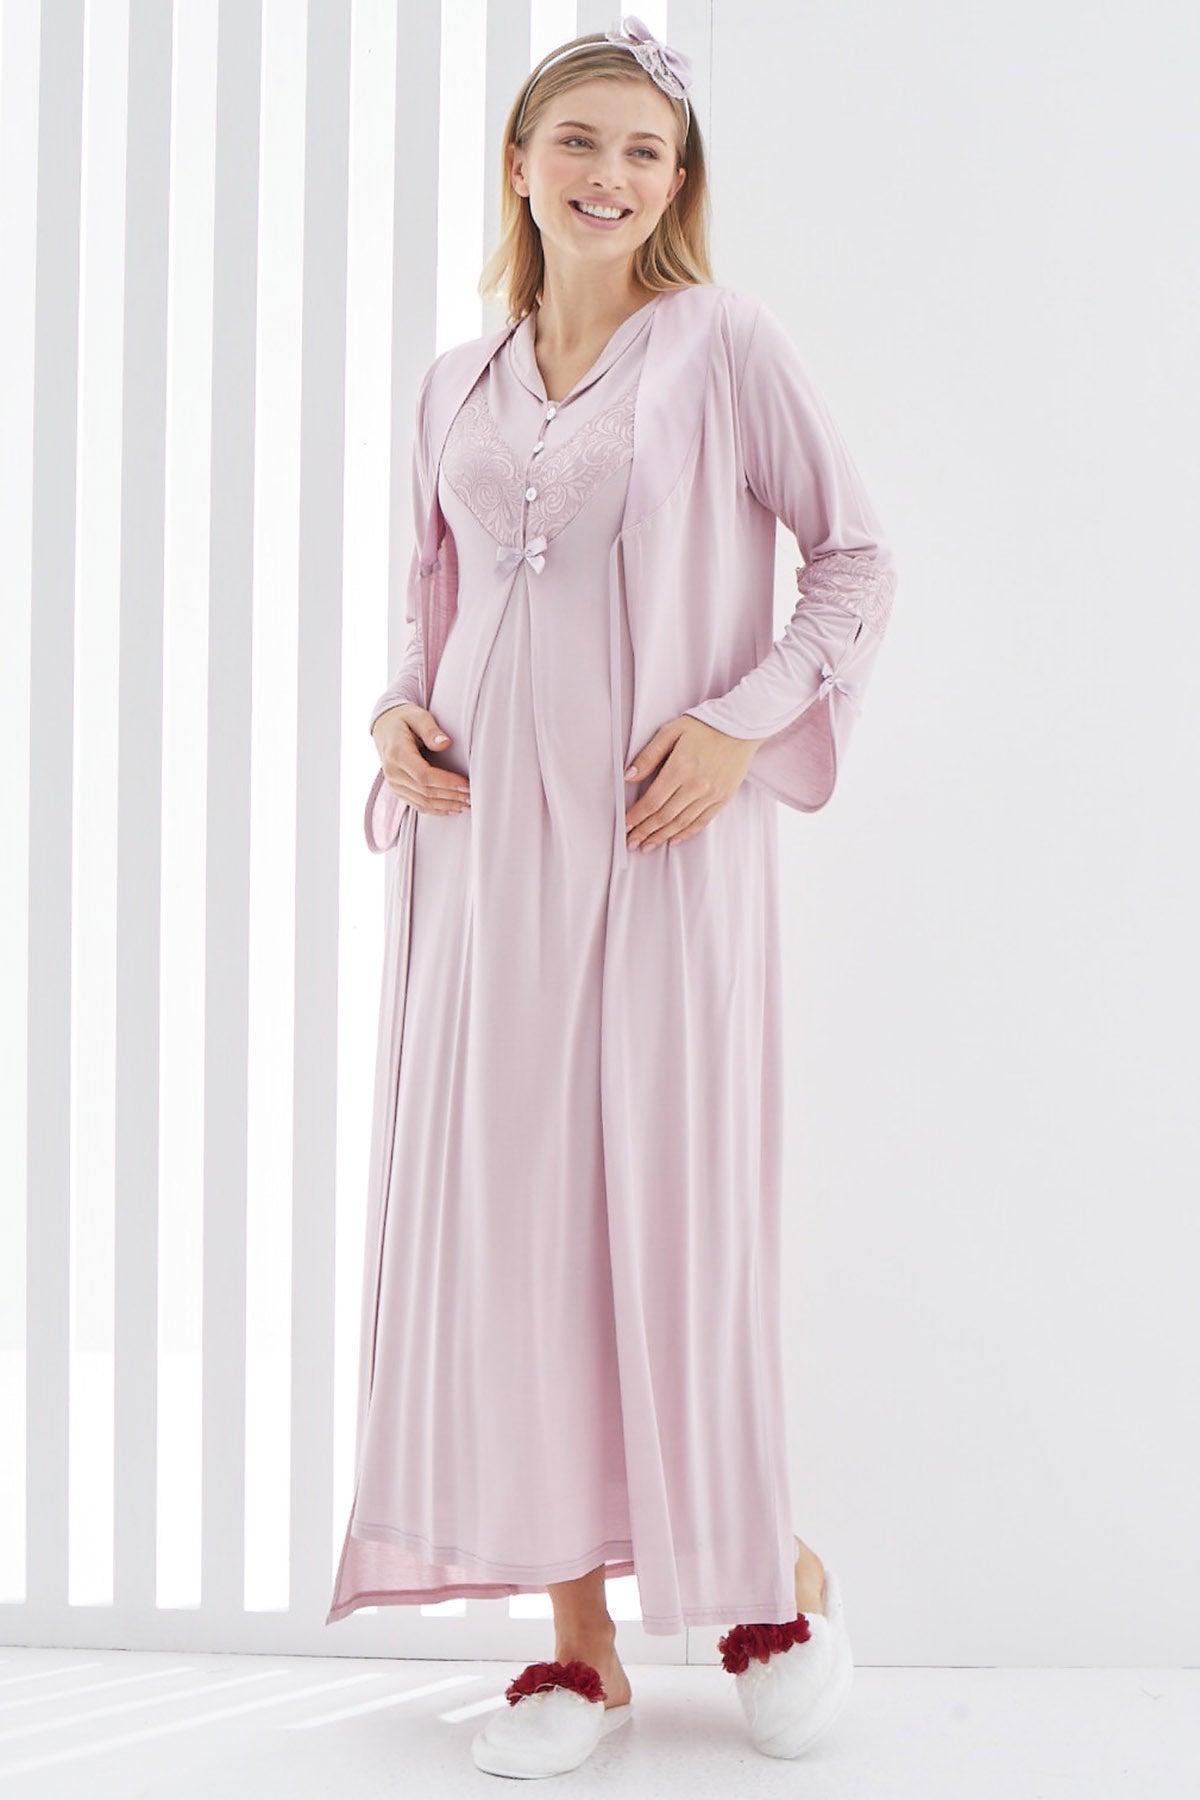 Shopymommy 2268 Guipure V-Neck Maternity & Nursing Nightgown With Robe Dried Rose